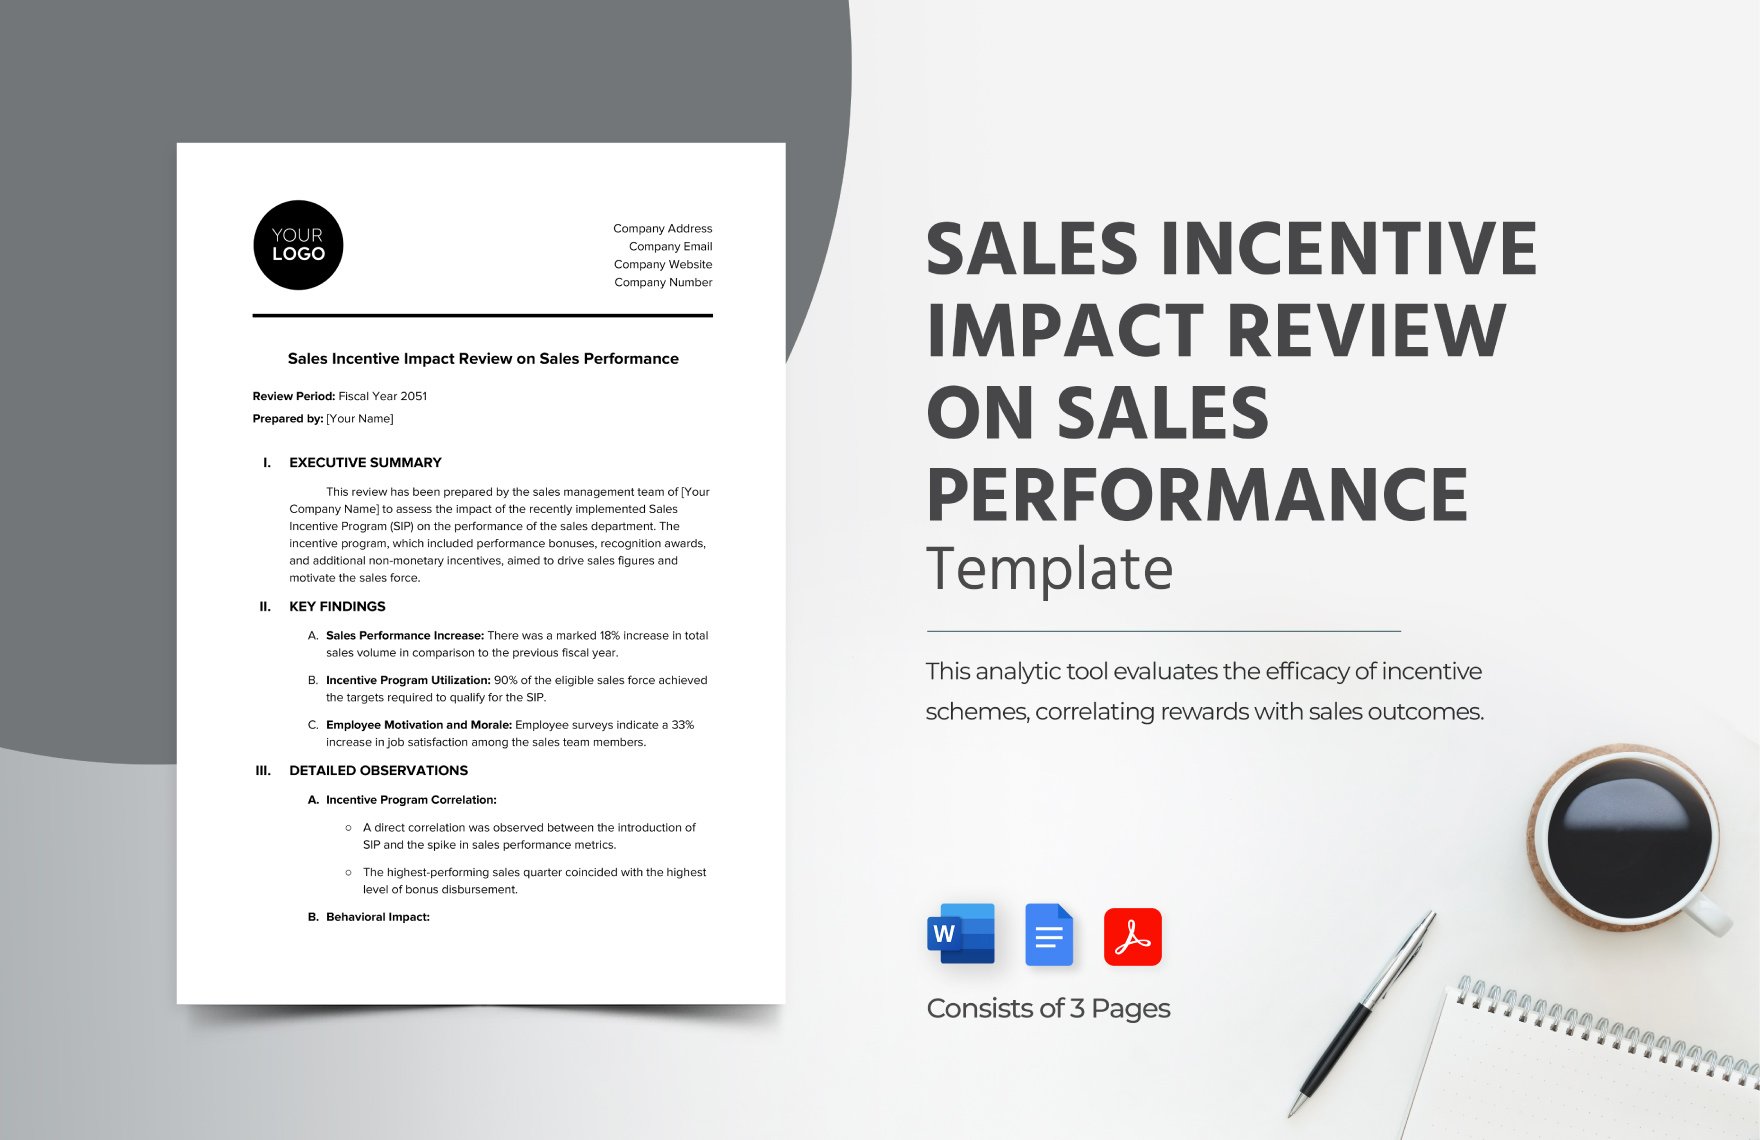 Sales Incentive Impact Review on Sales Performance Template